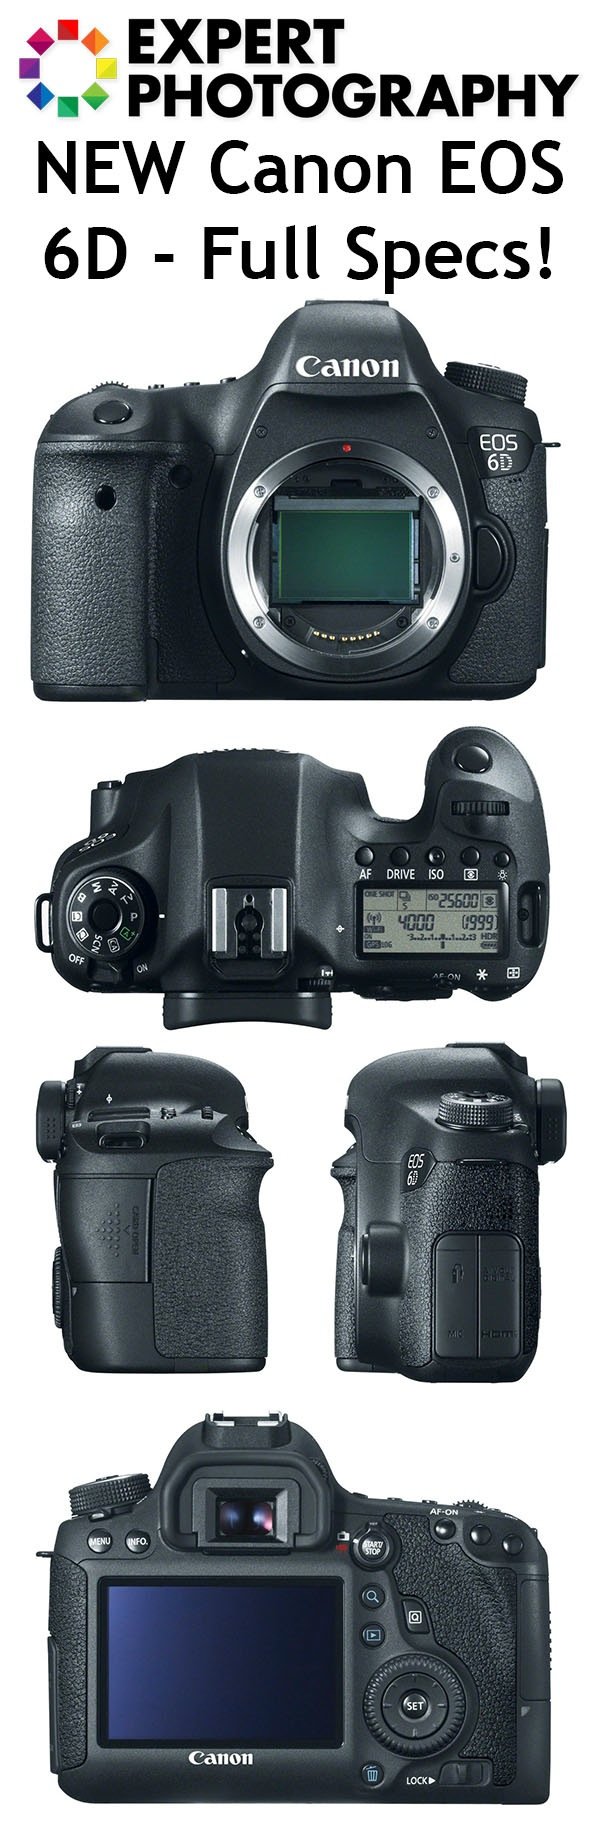 A collage of Canon EOS 6D camera shown from all directions